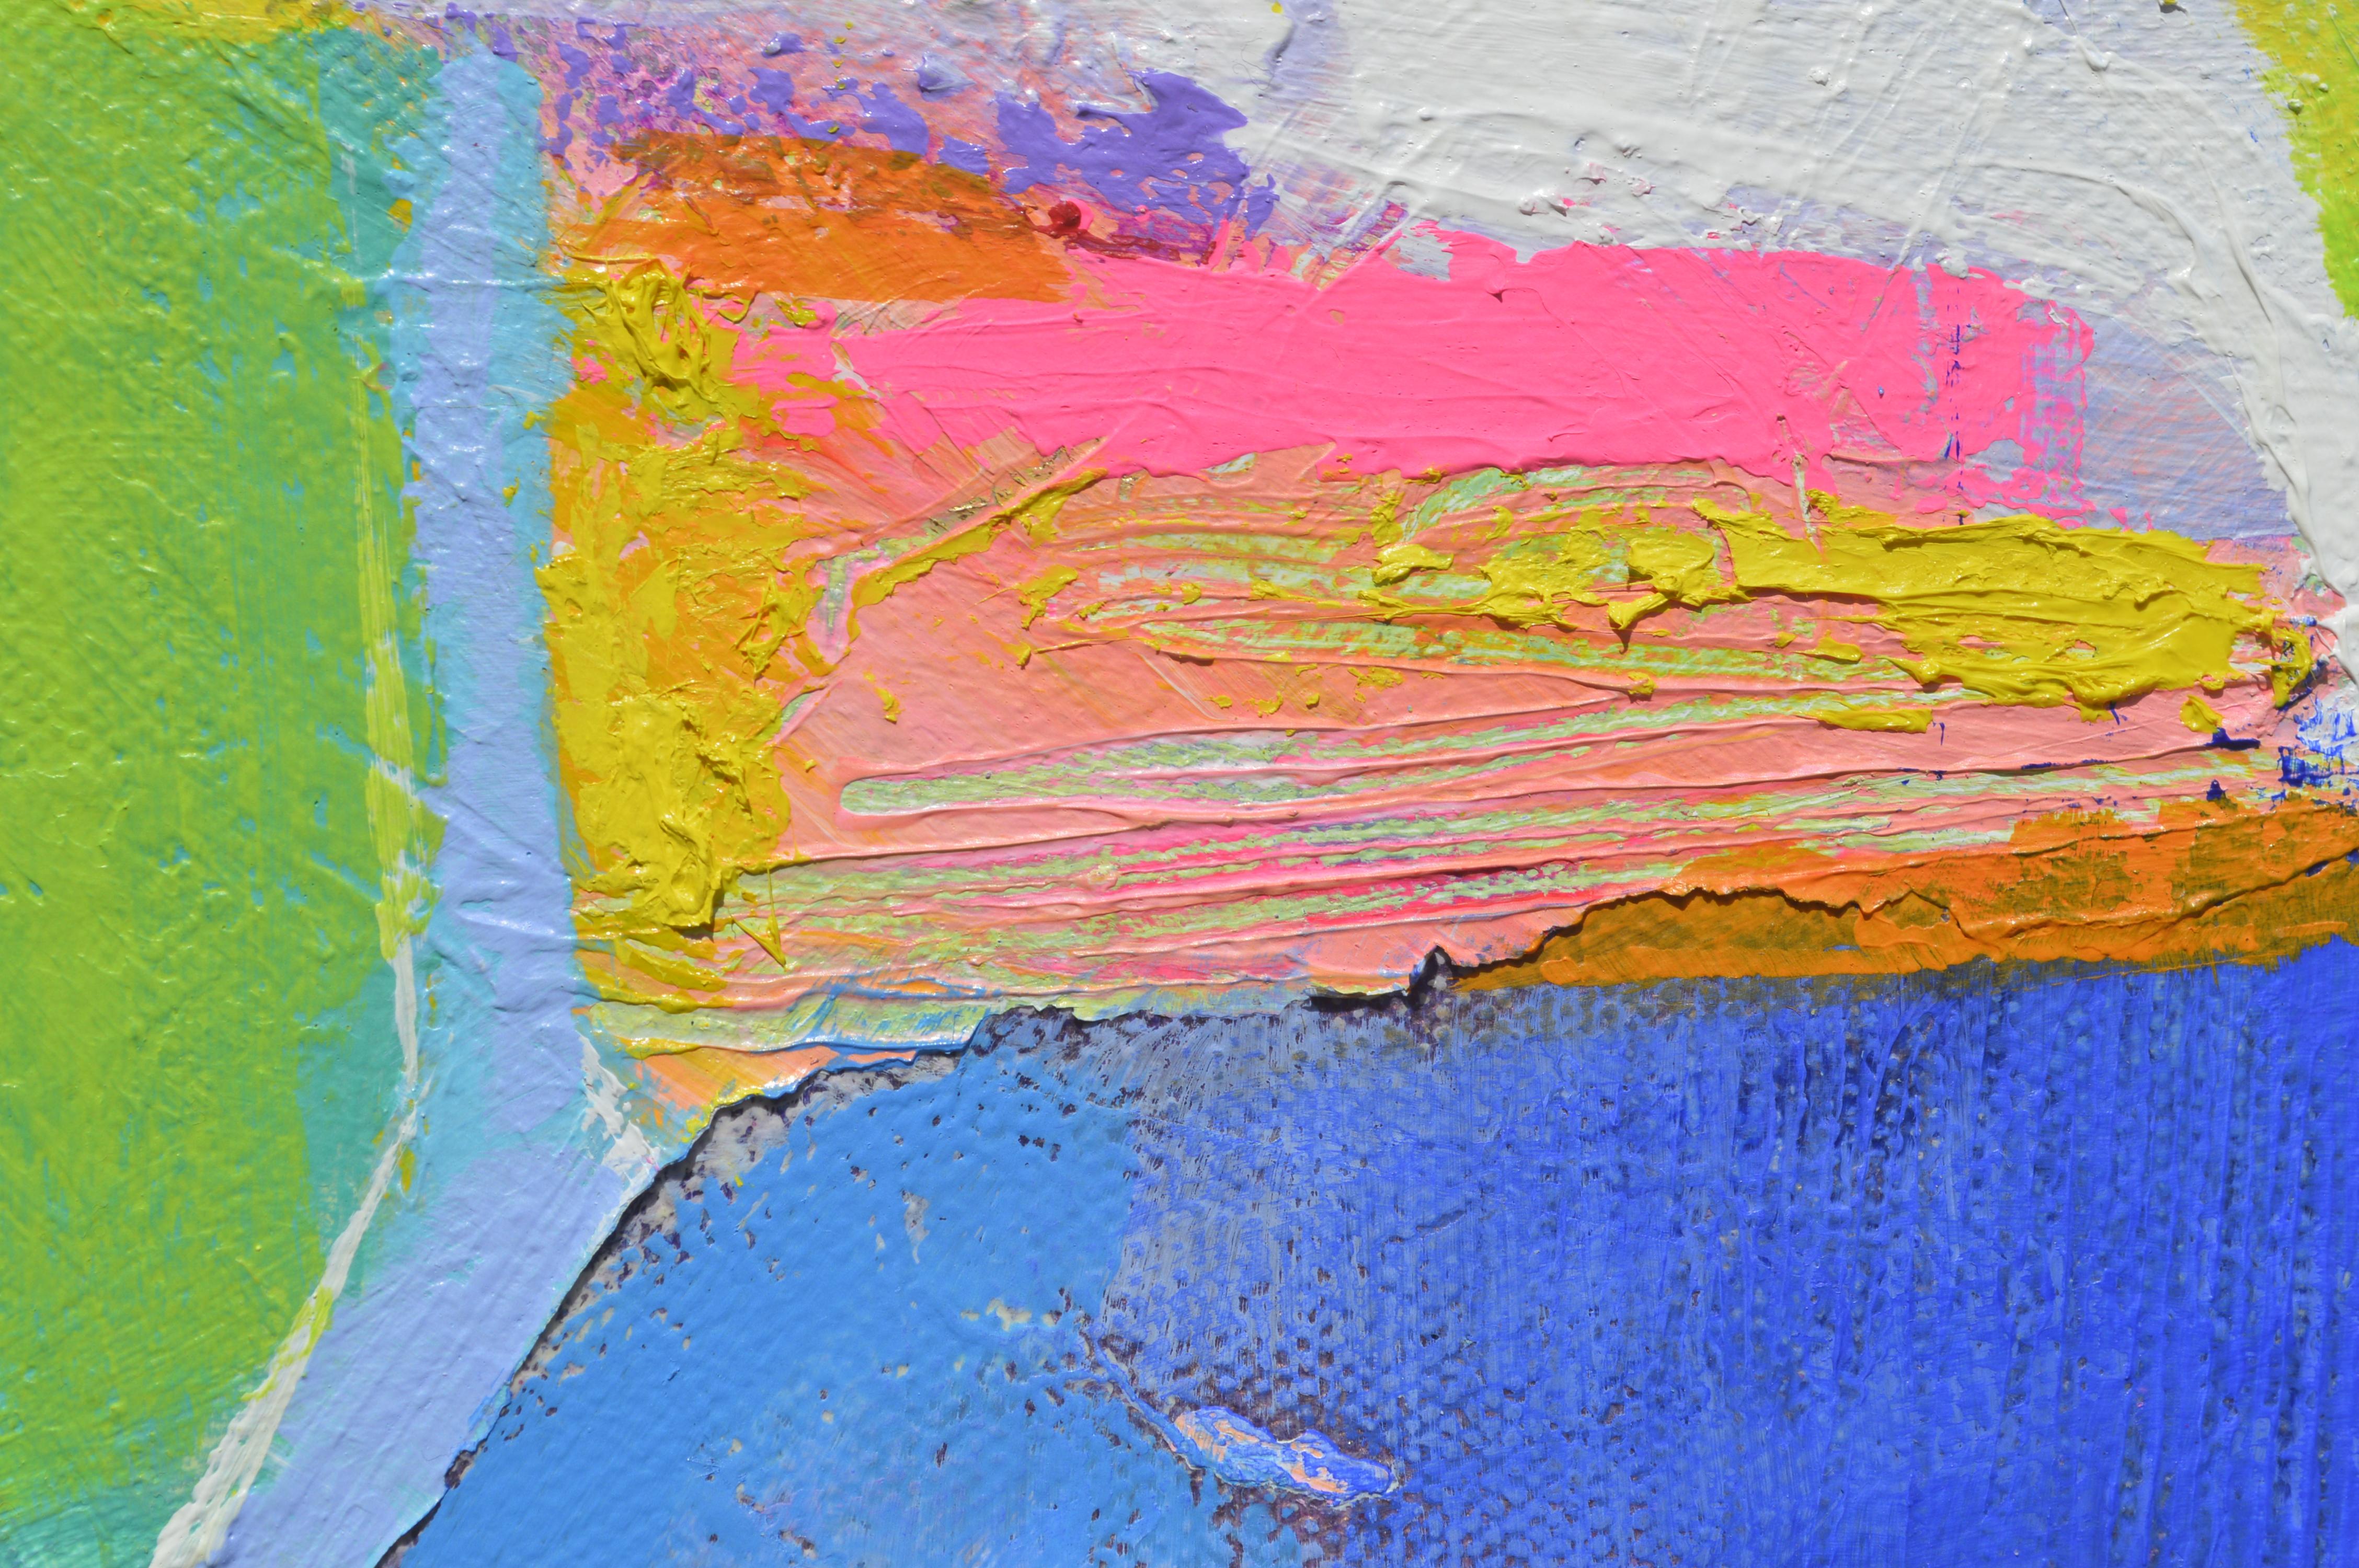 <p>Artist Comments<br>Artist Patrick O'Boyle fills the canvas with esoteric shapes to create an abstract view. Shades of lime green, powder blue, and hot pink fill the smooth contours. Part of his Aerial Landscape series. He references vertical